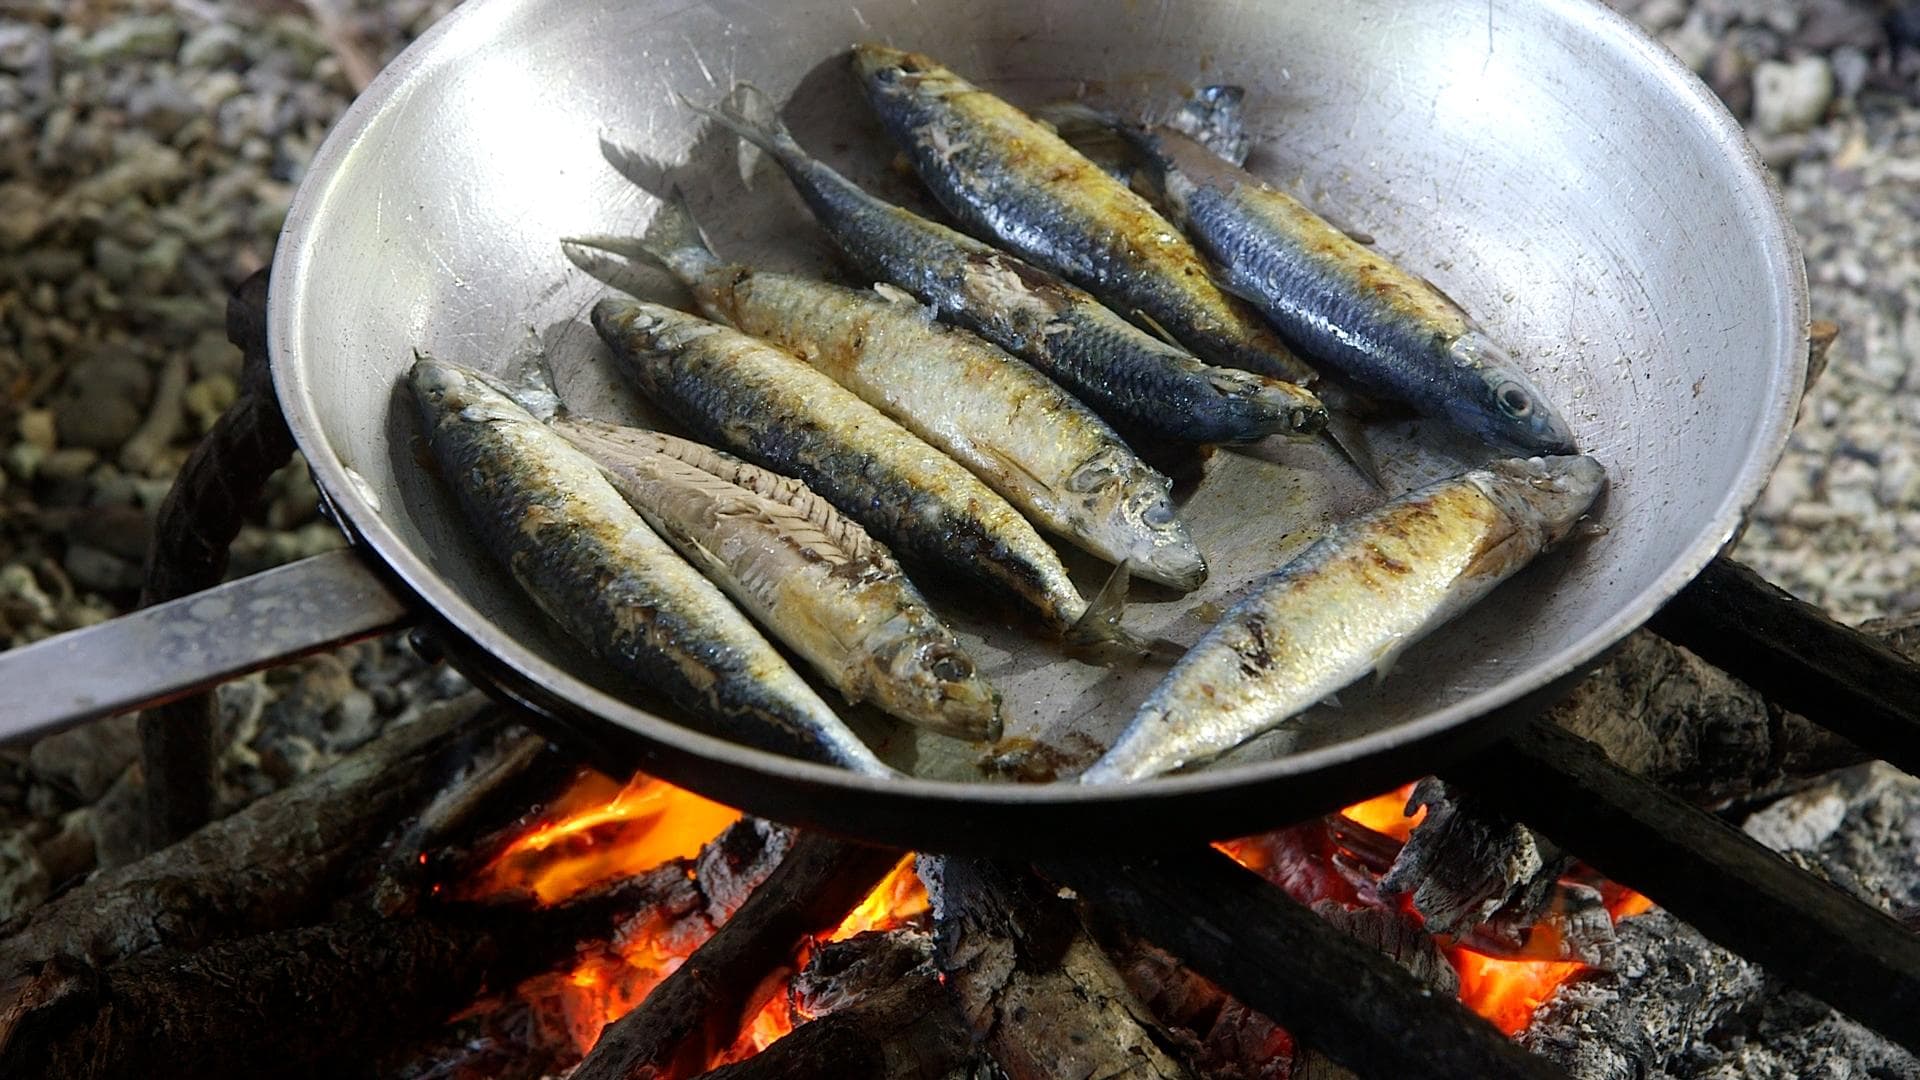 Aquatic foods are the cornerstone of the diets, livelihoods, economies and cultures of many communities around the world. Photo by Wade Fairley.